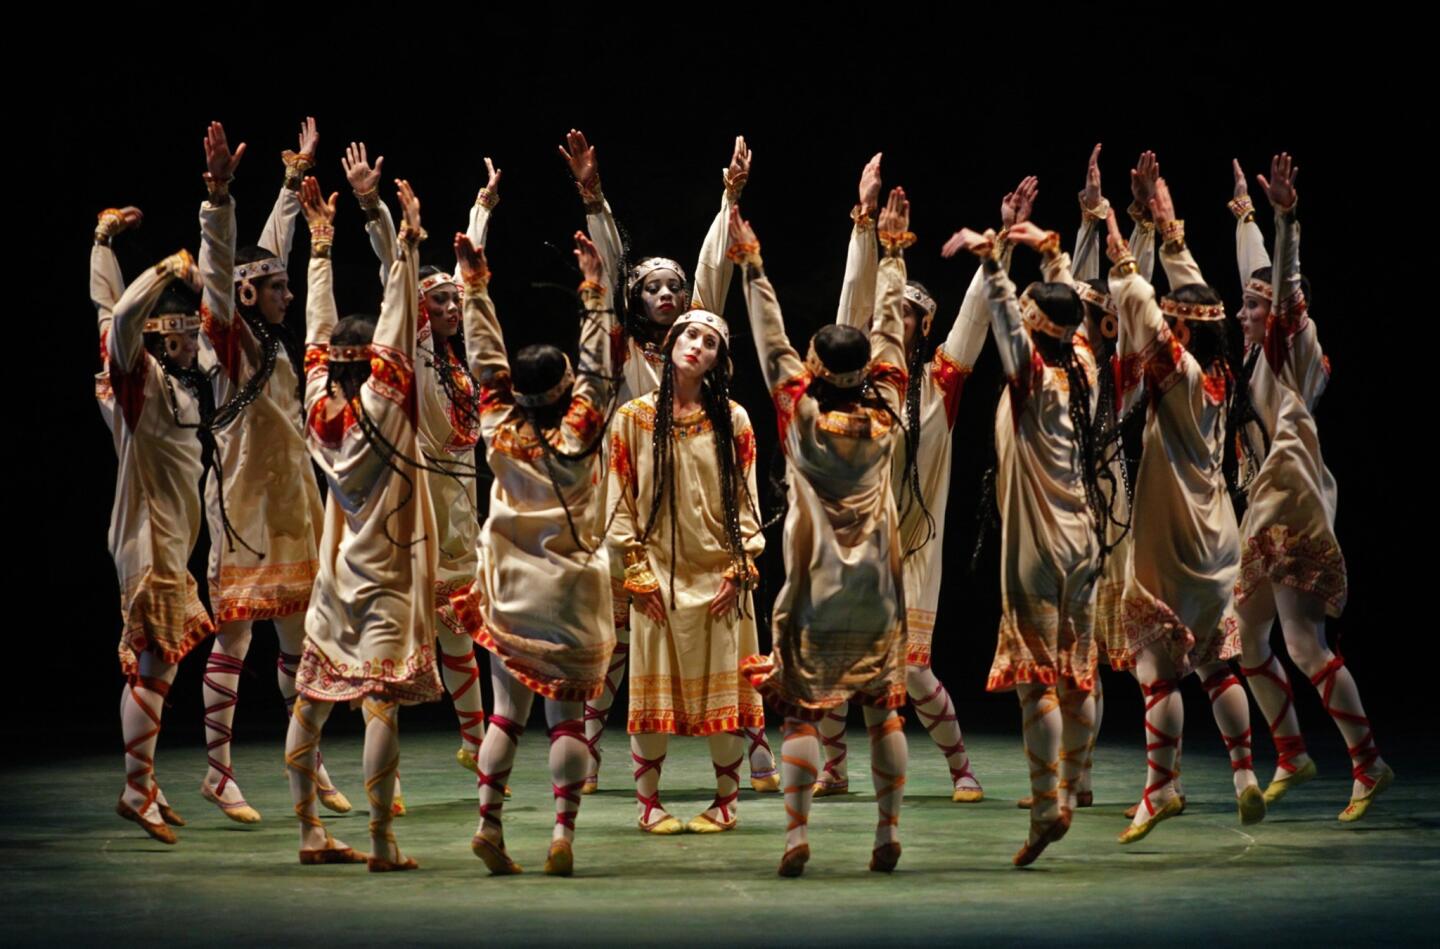 Elizabeth Hansen, playing the Chosen One, center, is surrounded by the Young Maidens as members of the Joffrey Ballet perform "The Rite of Spring" at the Dorothy Chandler Pavilion in Los Angeles.